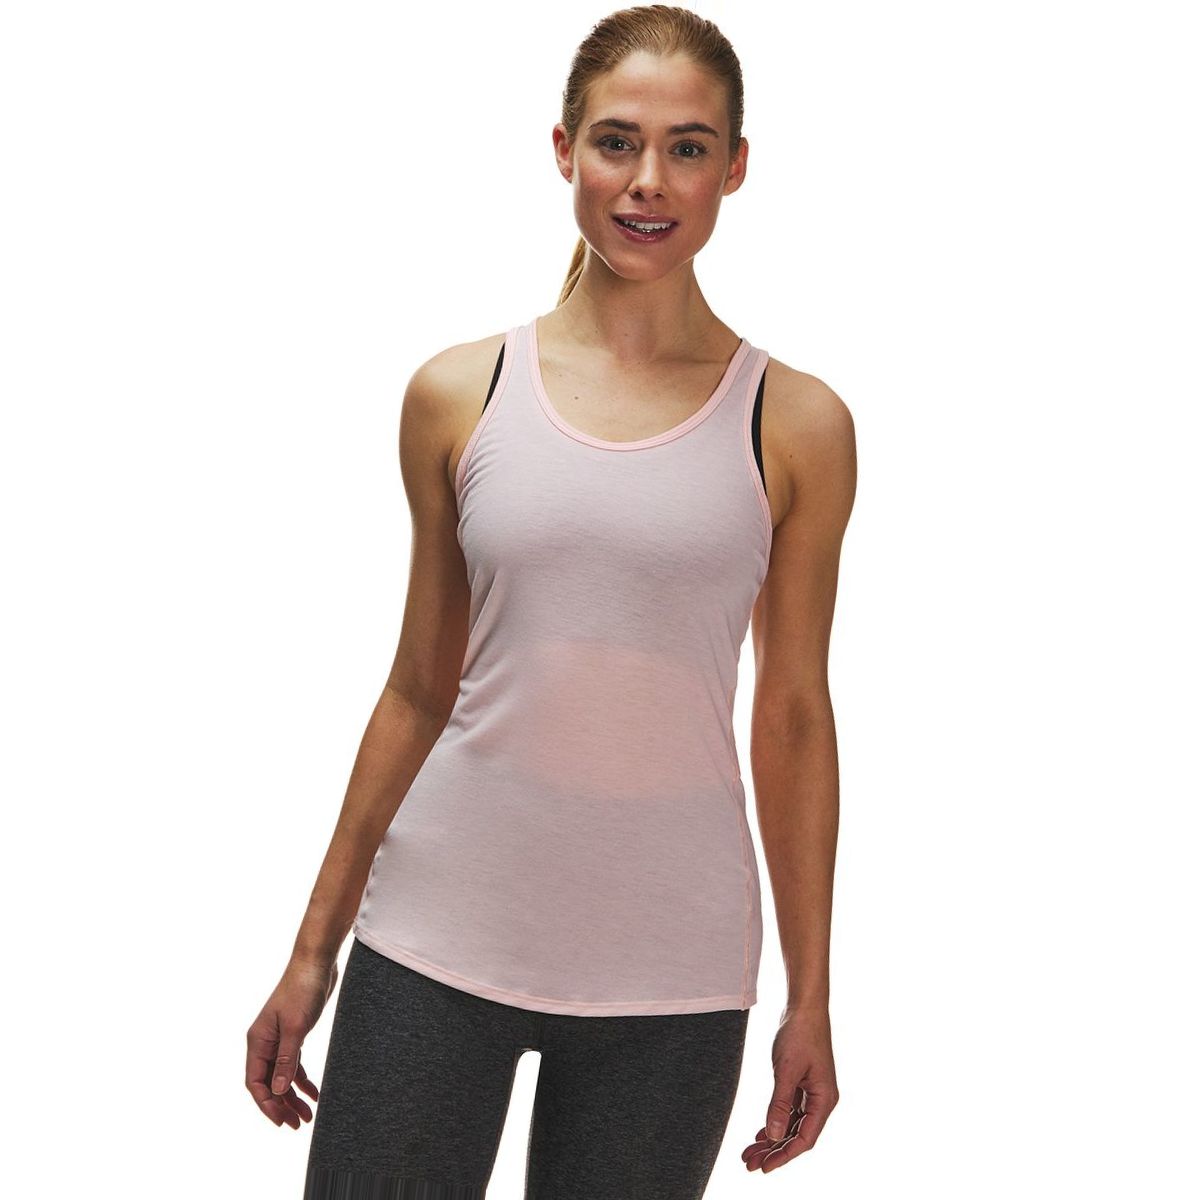 The North Face Workout Racerback Tank Top - Women's